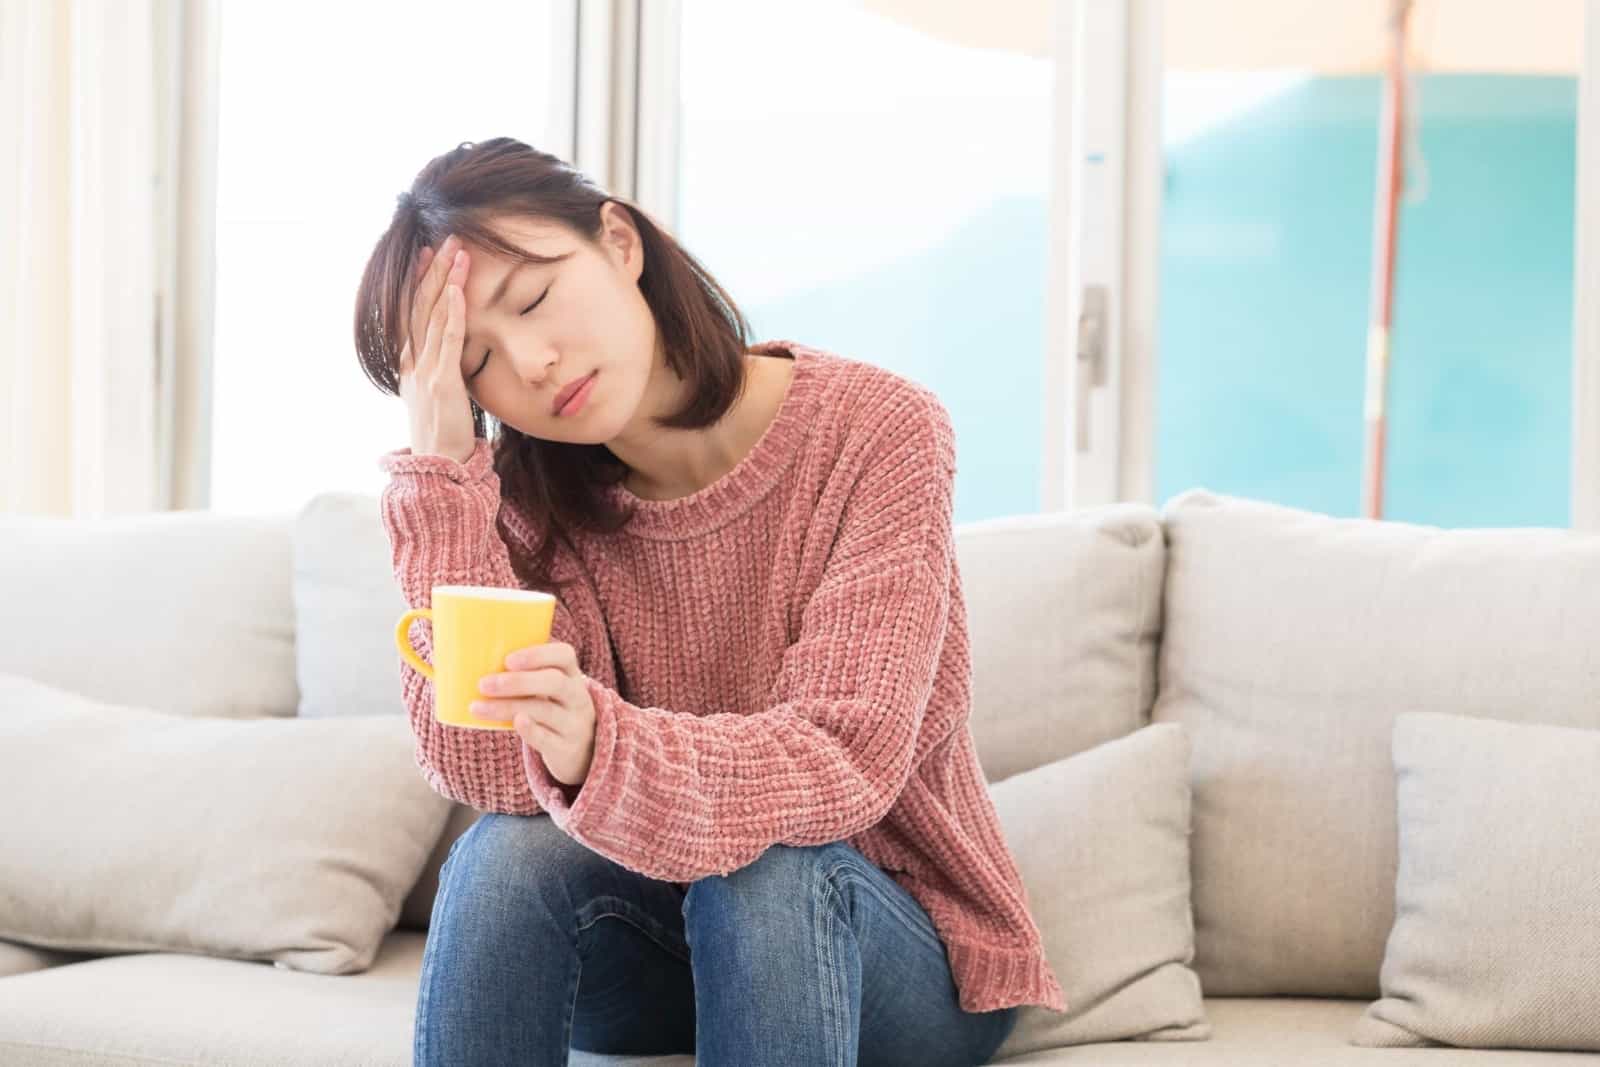 SIBO fatigue: Woman with a headache sitting on a couch and holding a mug